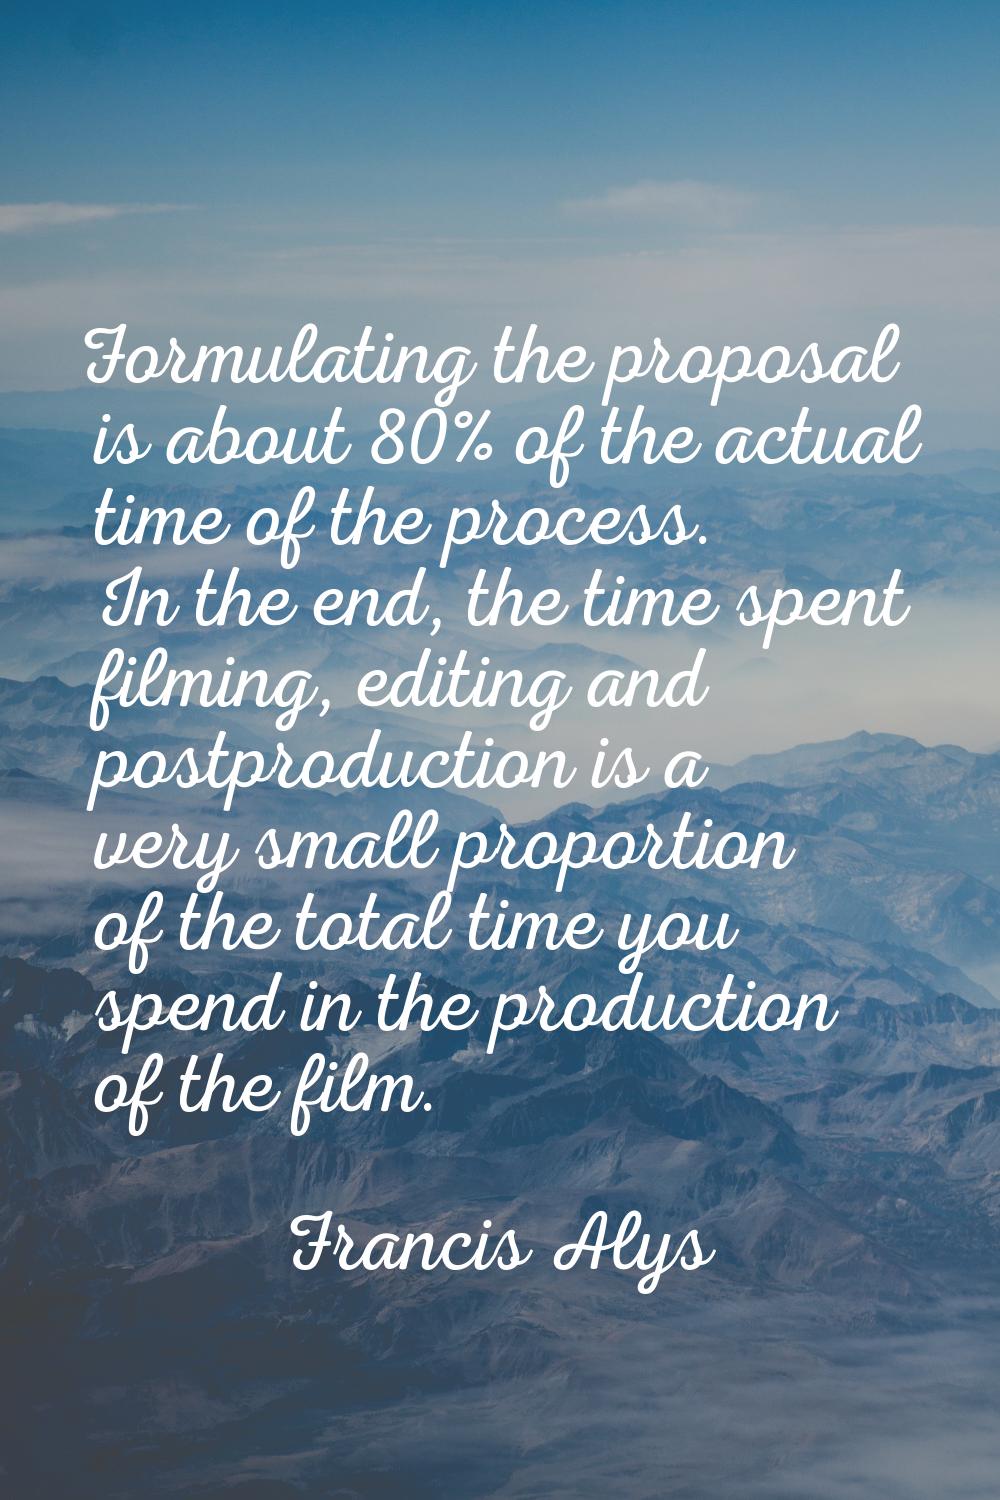 Formulating the proposal is about 80% of the actual time of the process. In the end, the time spent